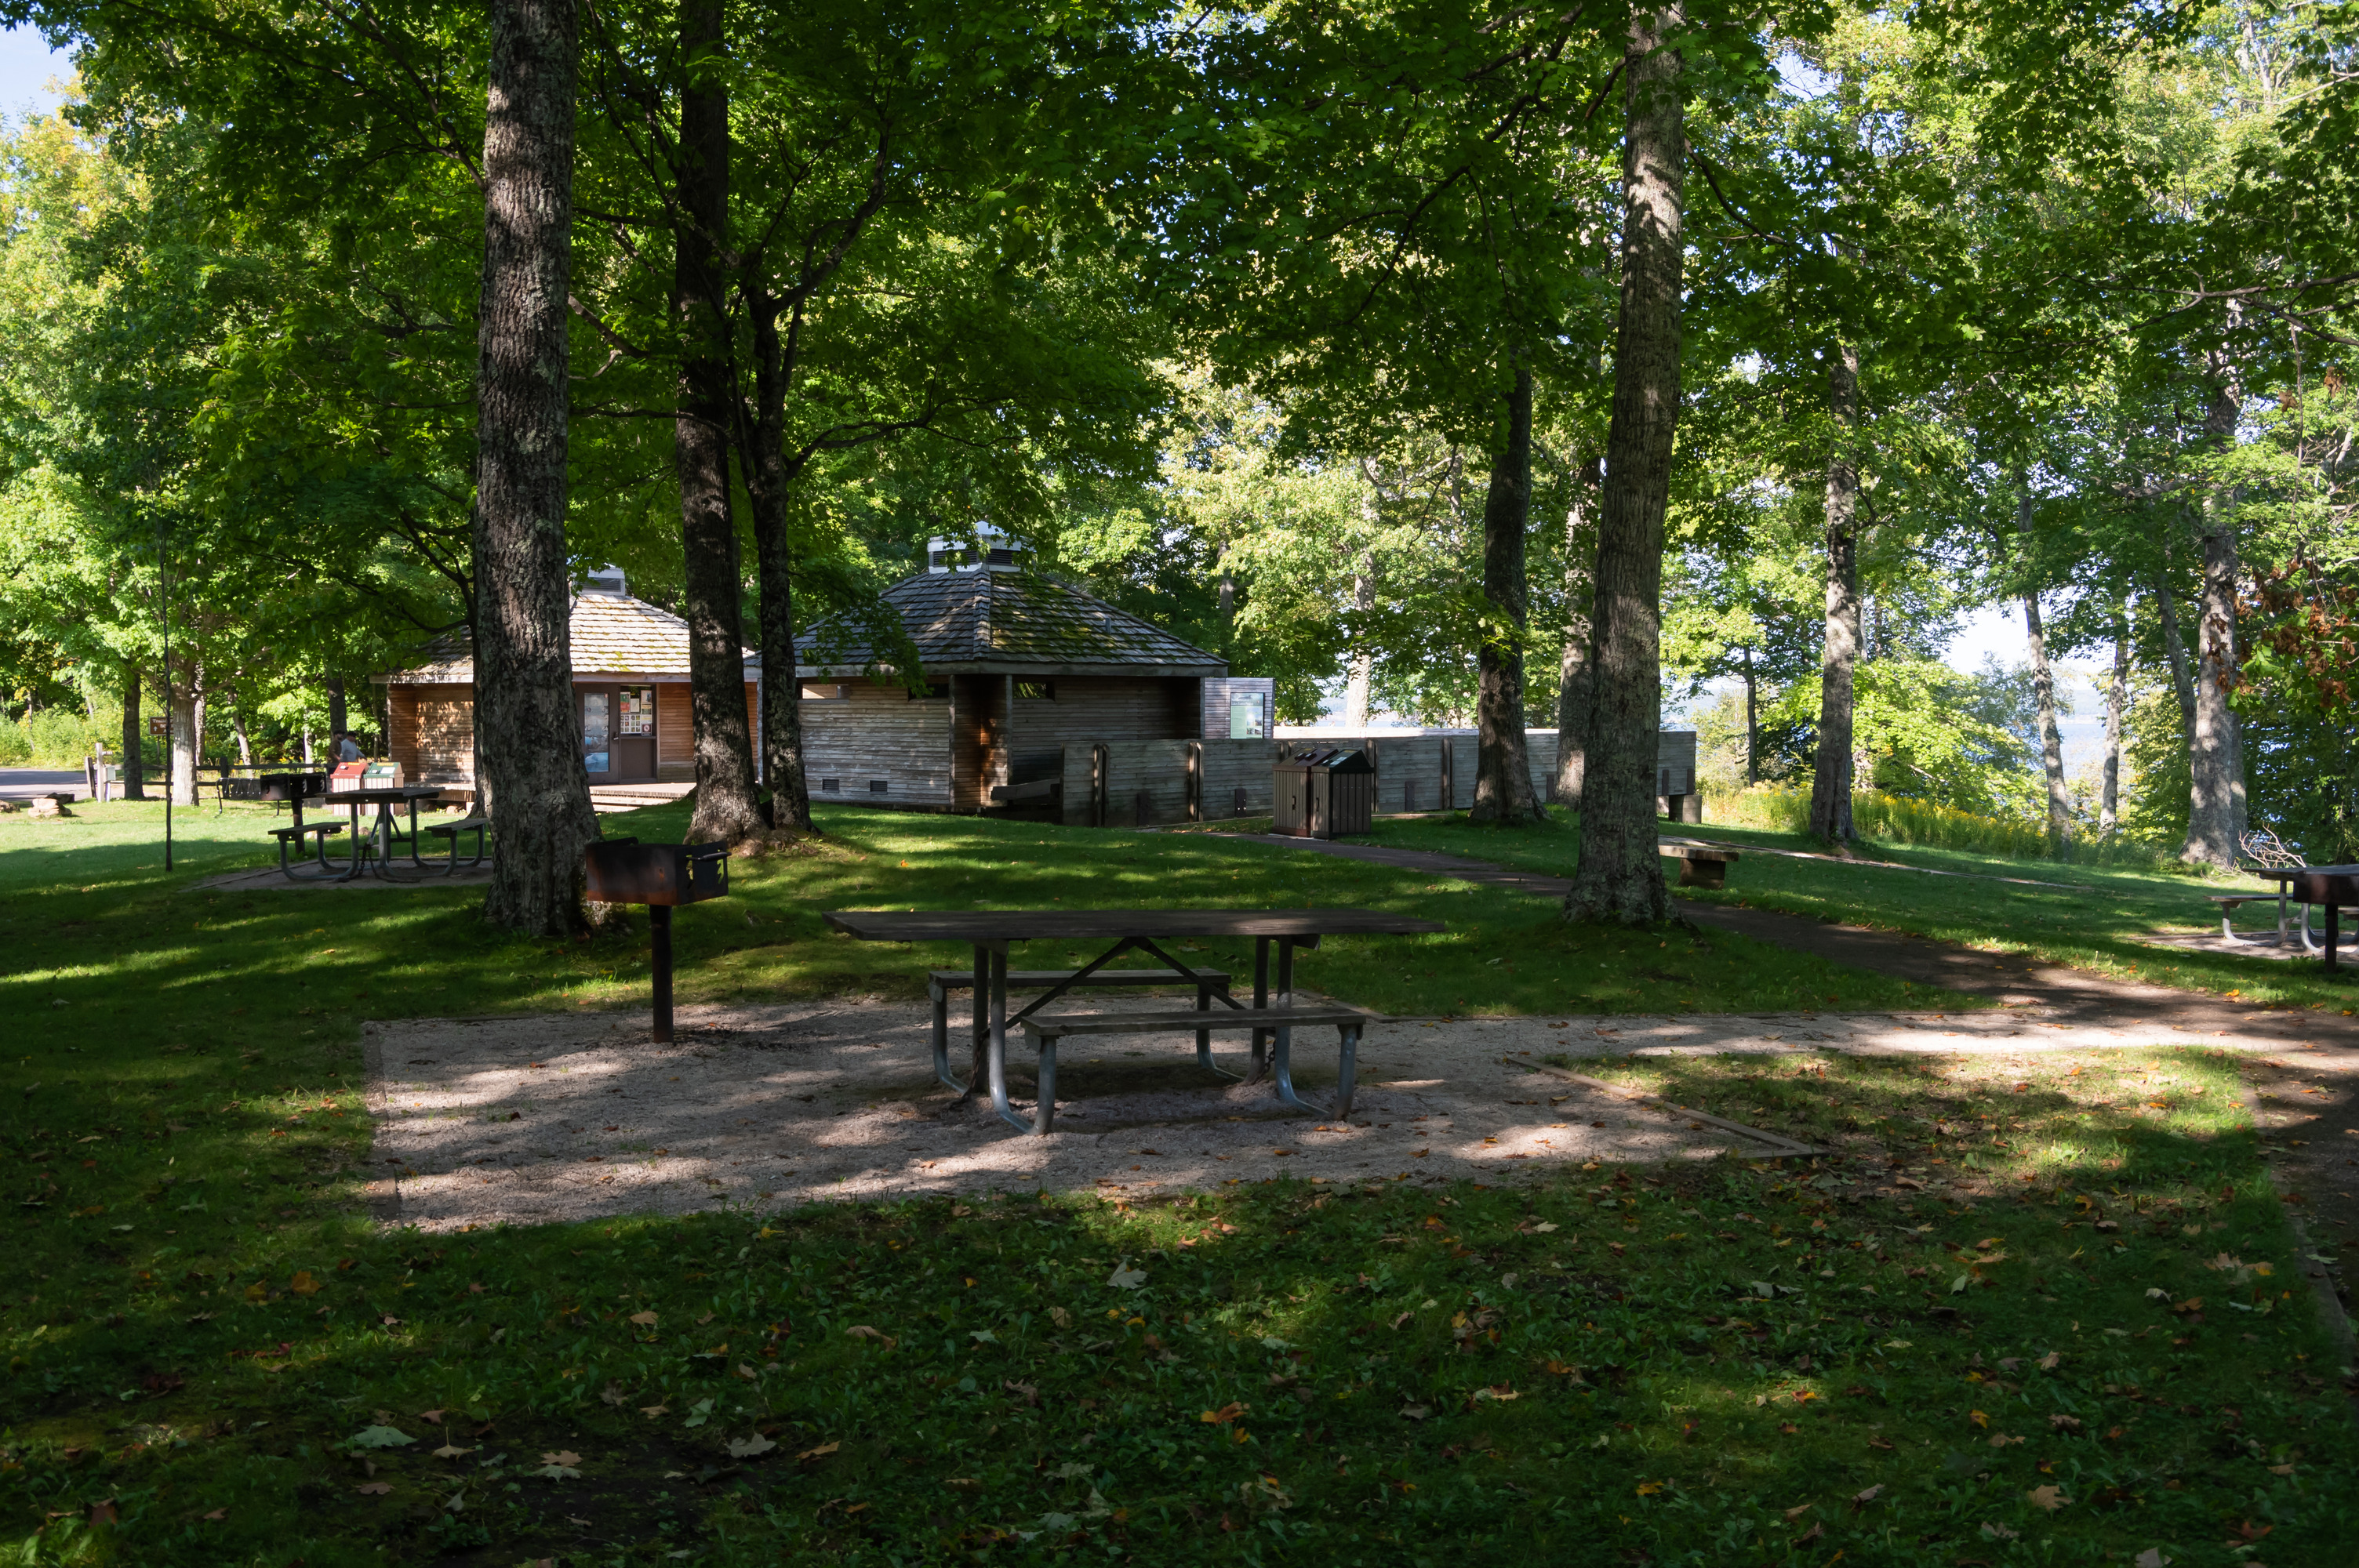 Picnic tables in the shade. Restroom facilities are in the background.